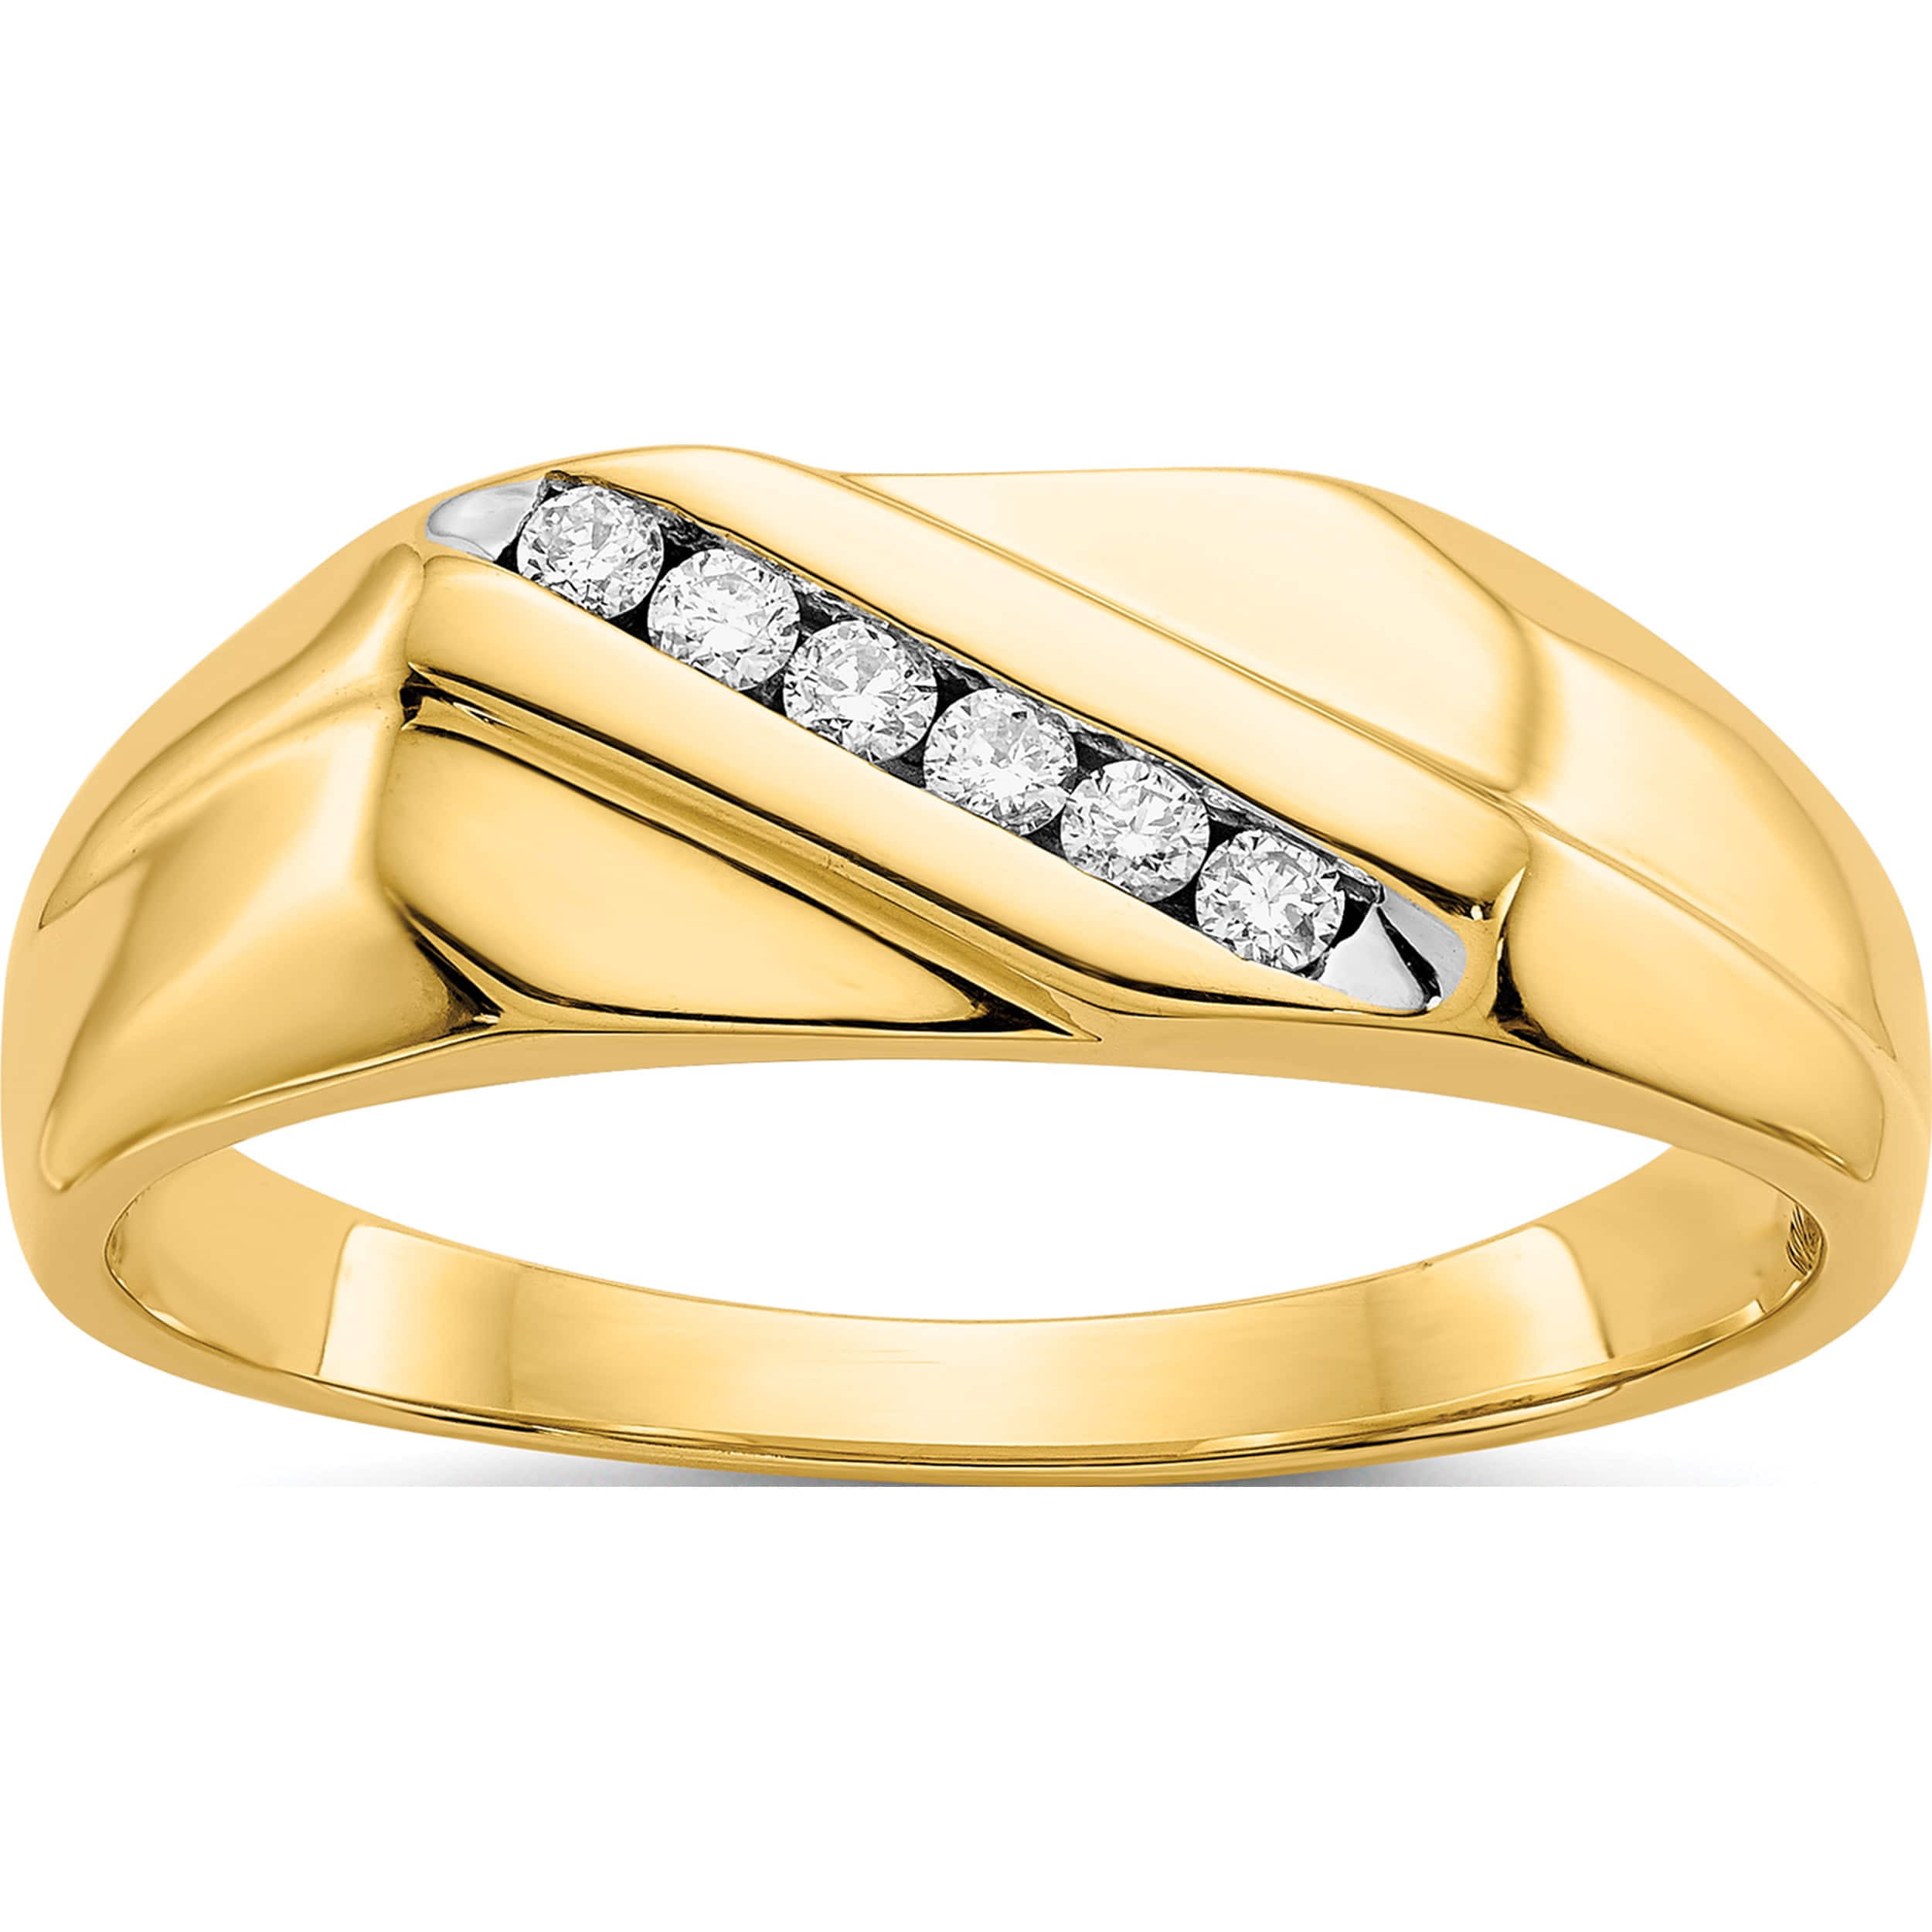 1 BAHT POLISHED SOLID DOMED WEDDING BAND RING IN 23K GOLD (ID: R0401B) –  eThaiGold